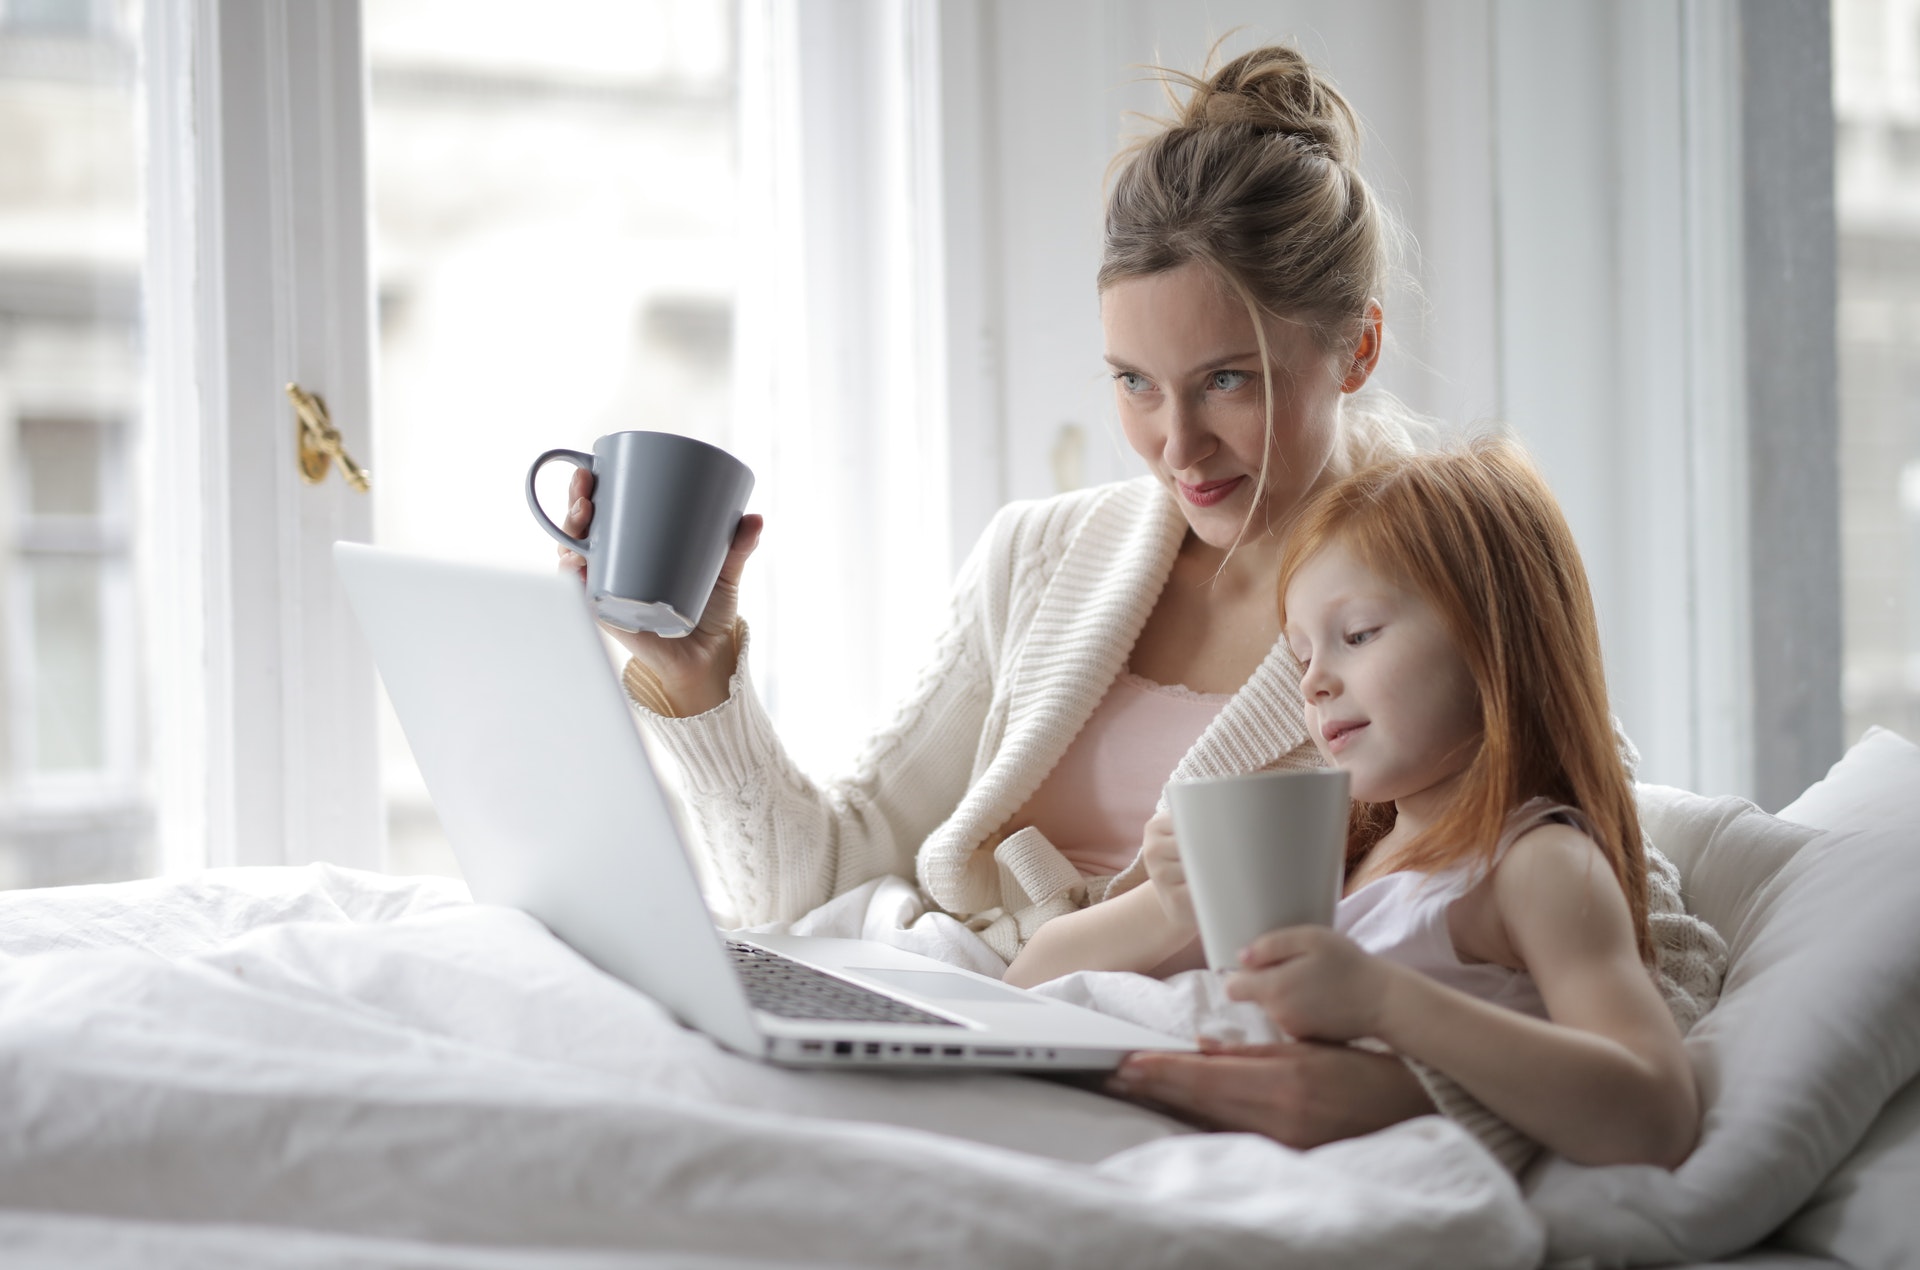 Working From Home with Kids? Follow These 9 Tips to Avoid Getting Distracted